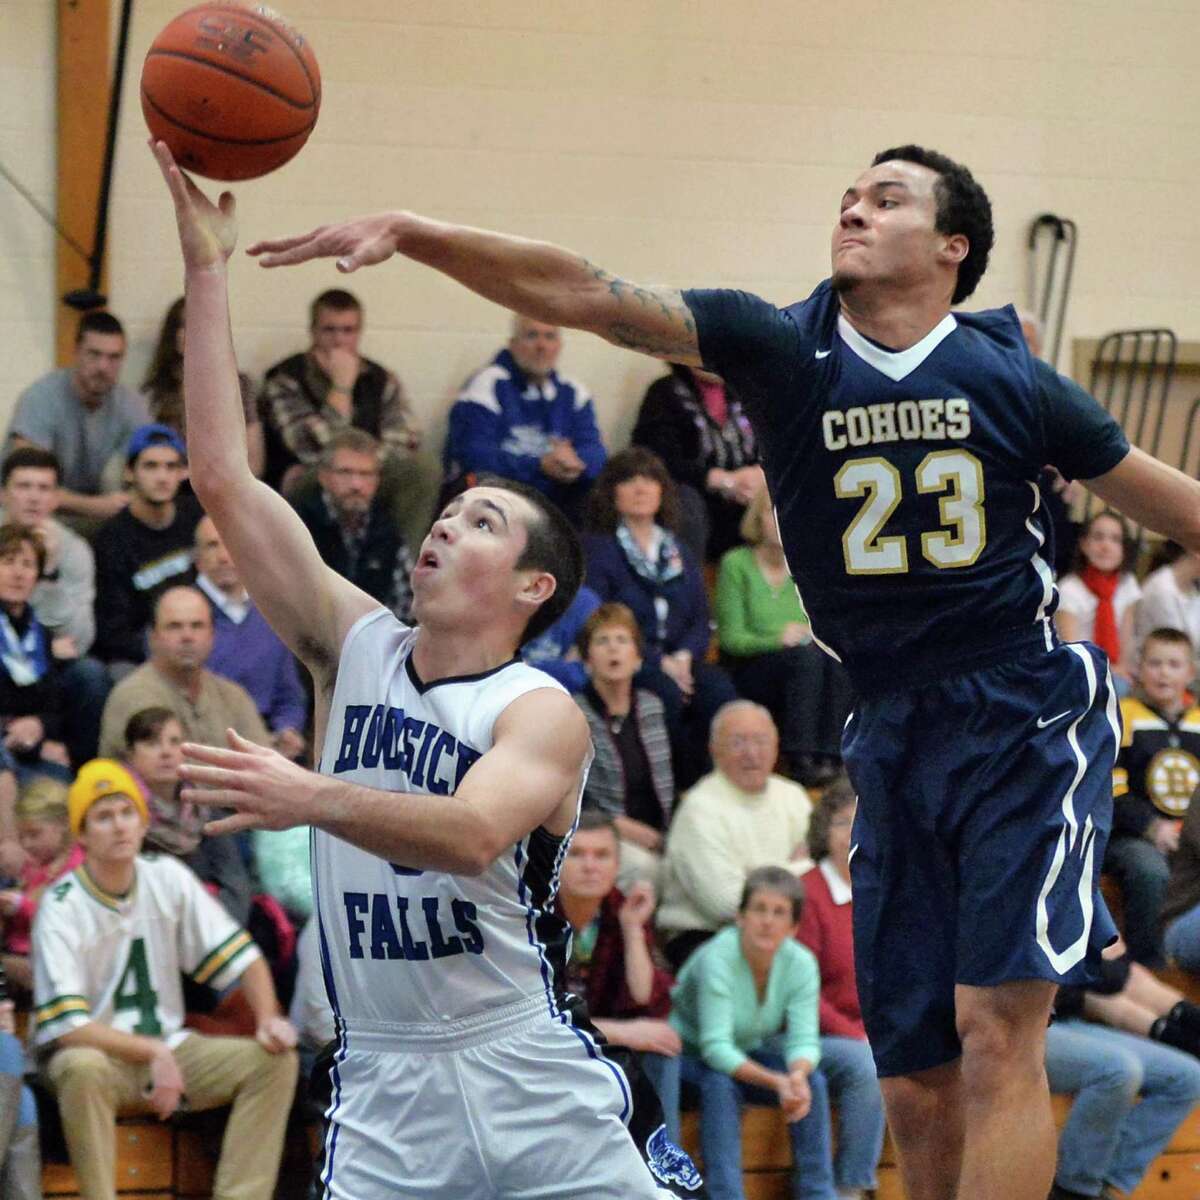 Hoosick Falls's #5 Andrew Hoag, left, goes to the basket guarded by Cohoes' #23 Shelton Alston during Saturday's game Jan. 17, 2015, in Hoosick Falls, NY. (John Carl D'Annibale / Times Union)